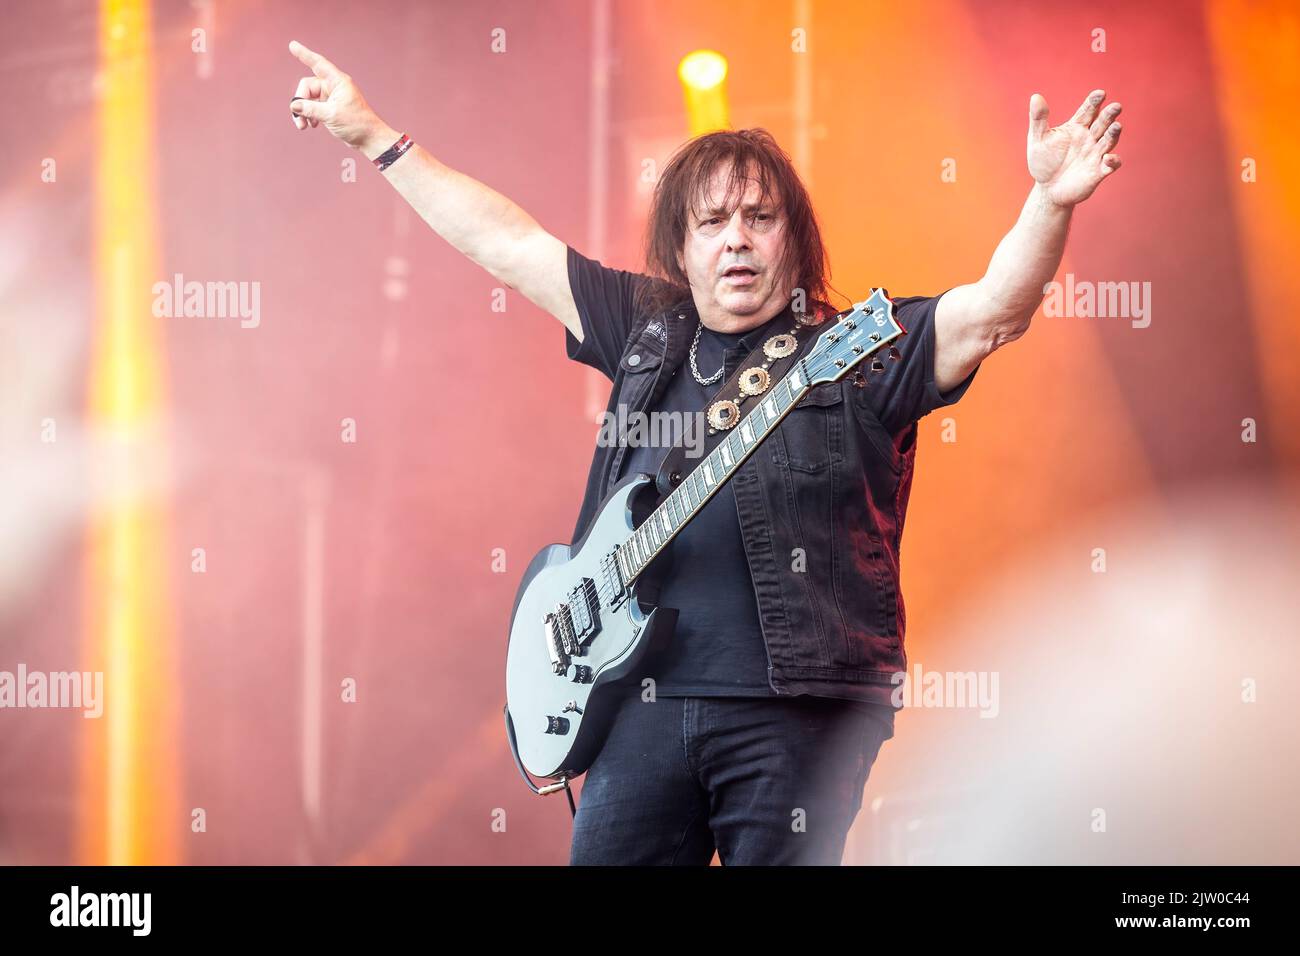 Solvesborg, Sweden. 10th, June 2022. The American guitarist and musician Ross the Boss performs a live concert during the Swedish music festival Sweden Rock Festival 2022 in Solvesborg. (Photo credit: Gonzales Photo - Terje Dokken). Stock Photo